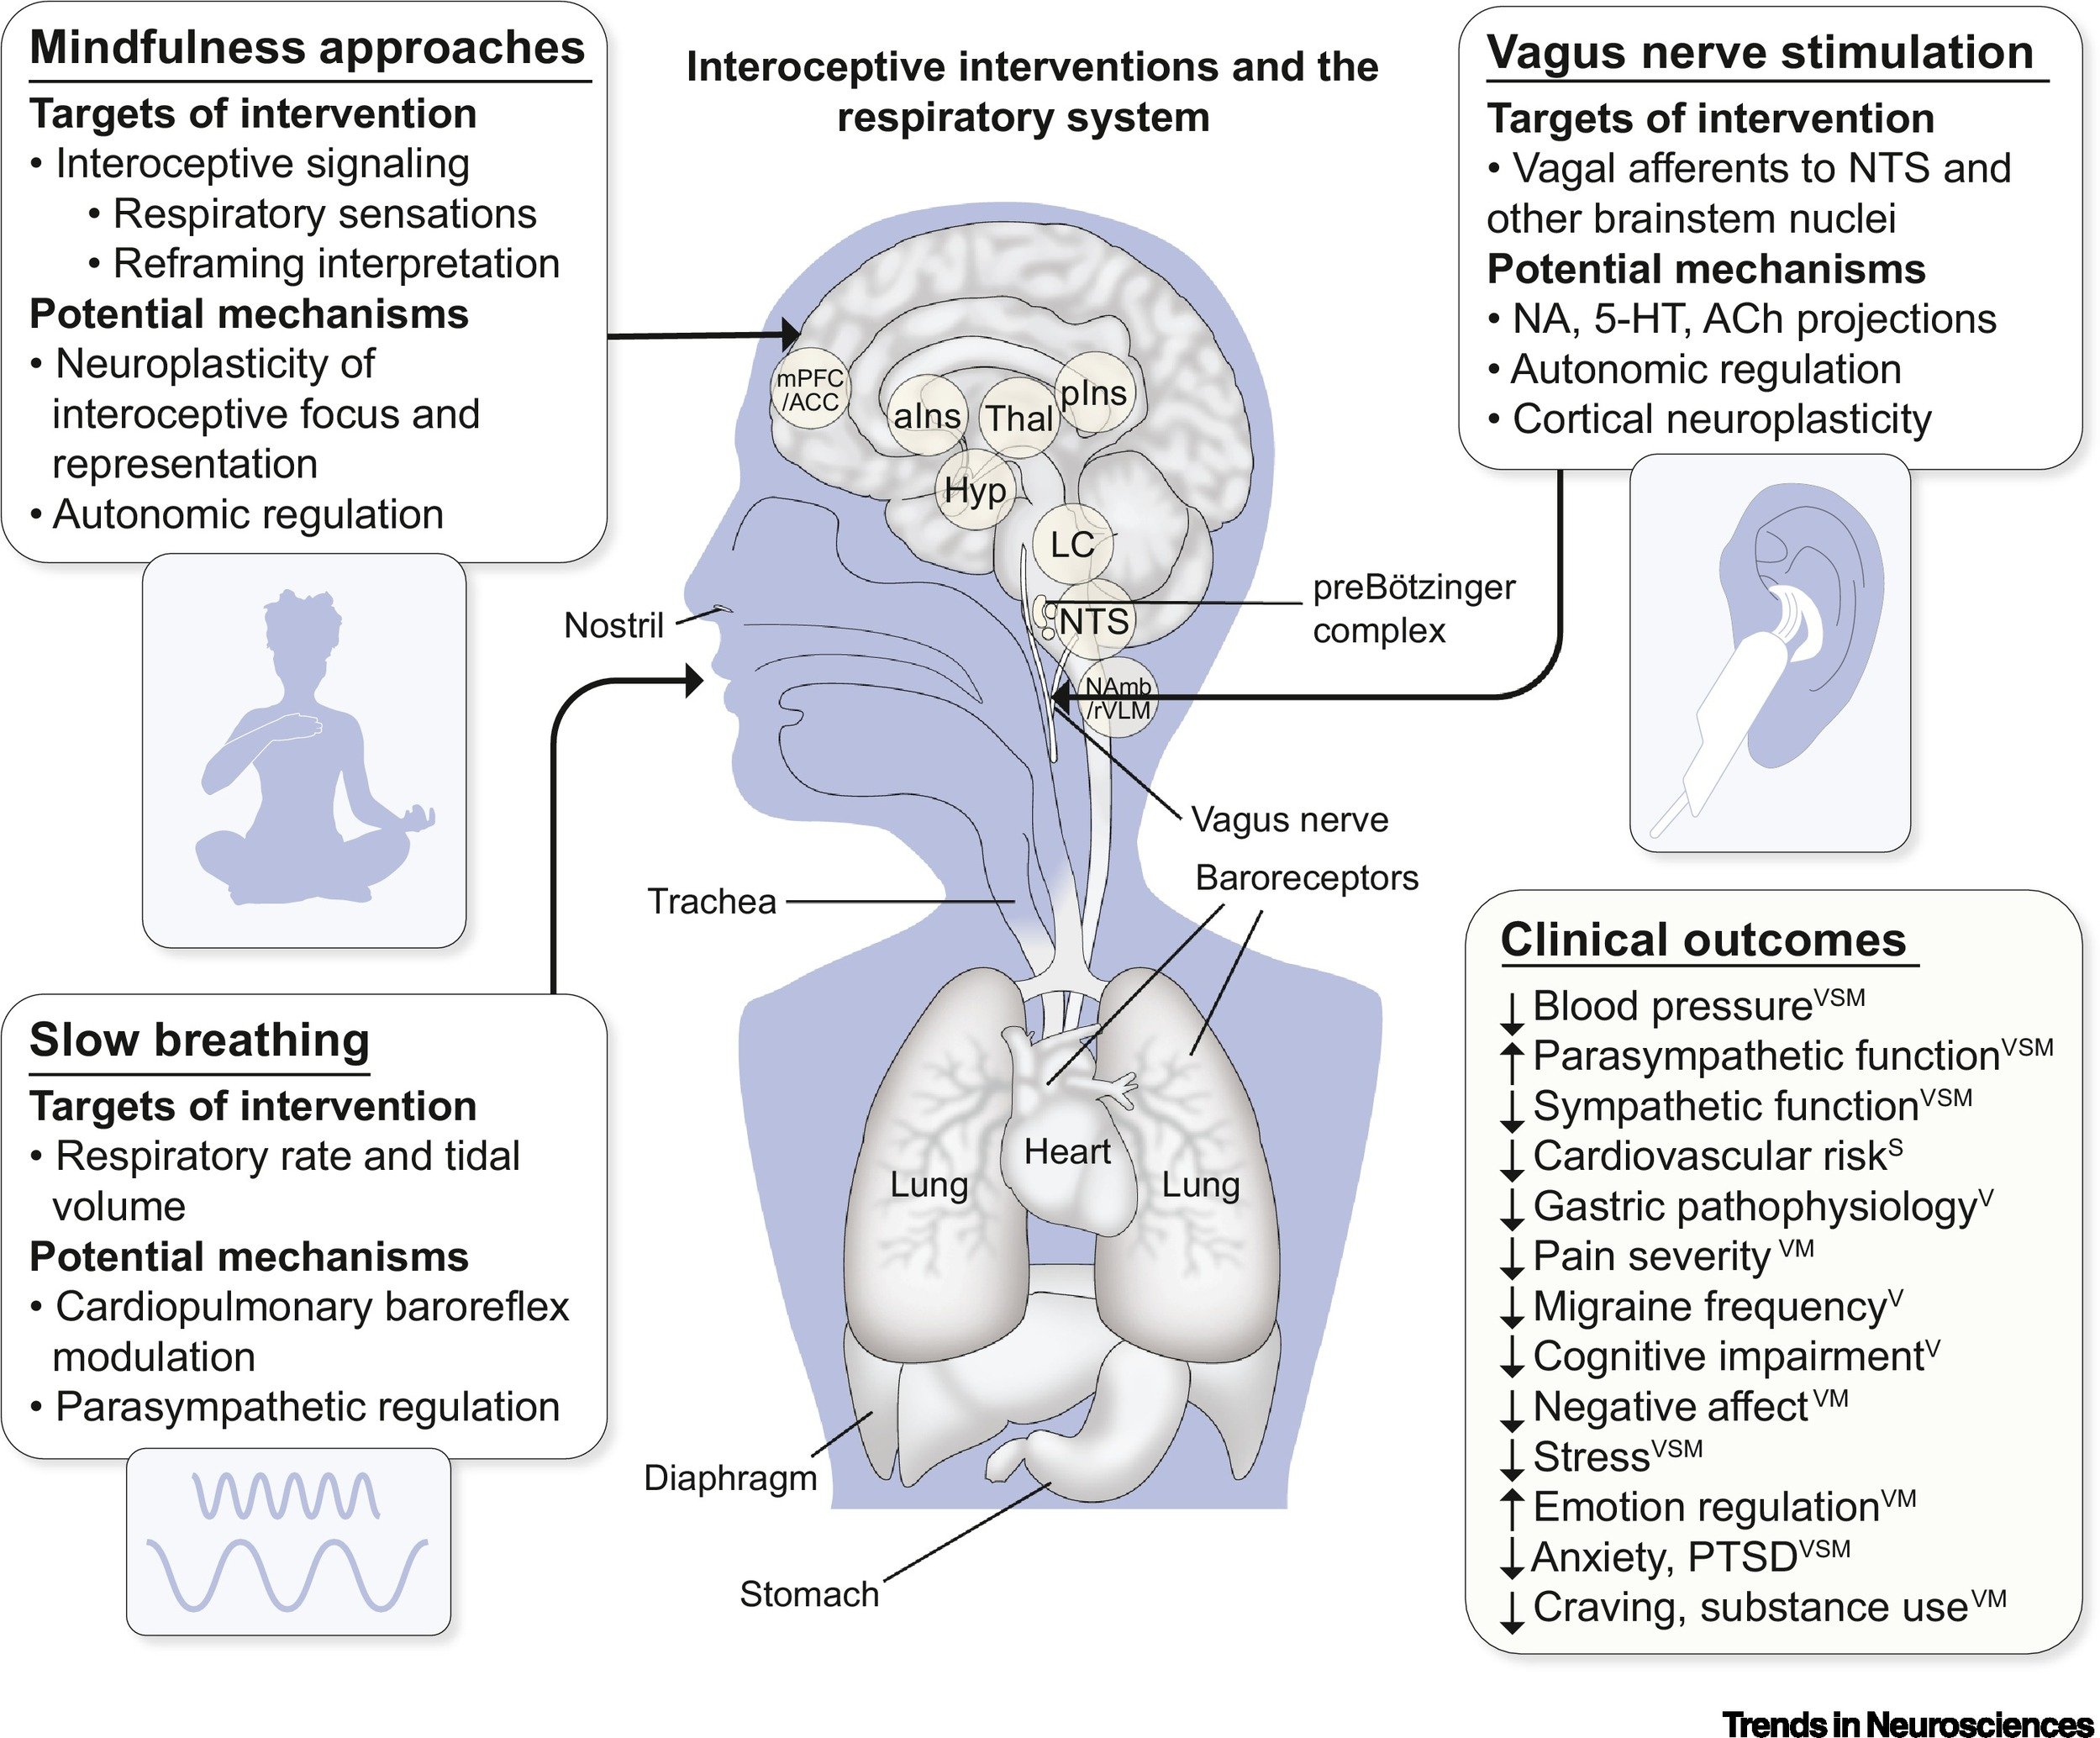 Anxiety influences interoceptive signals from the respiratory system